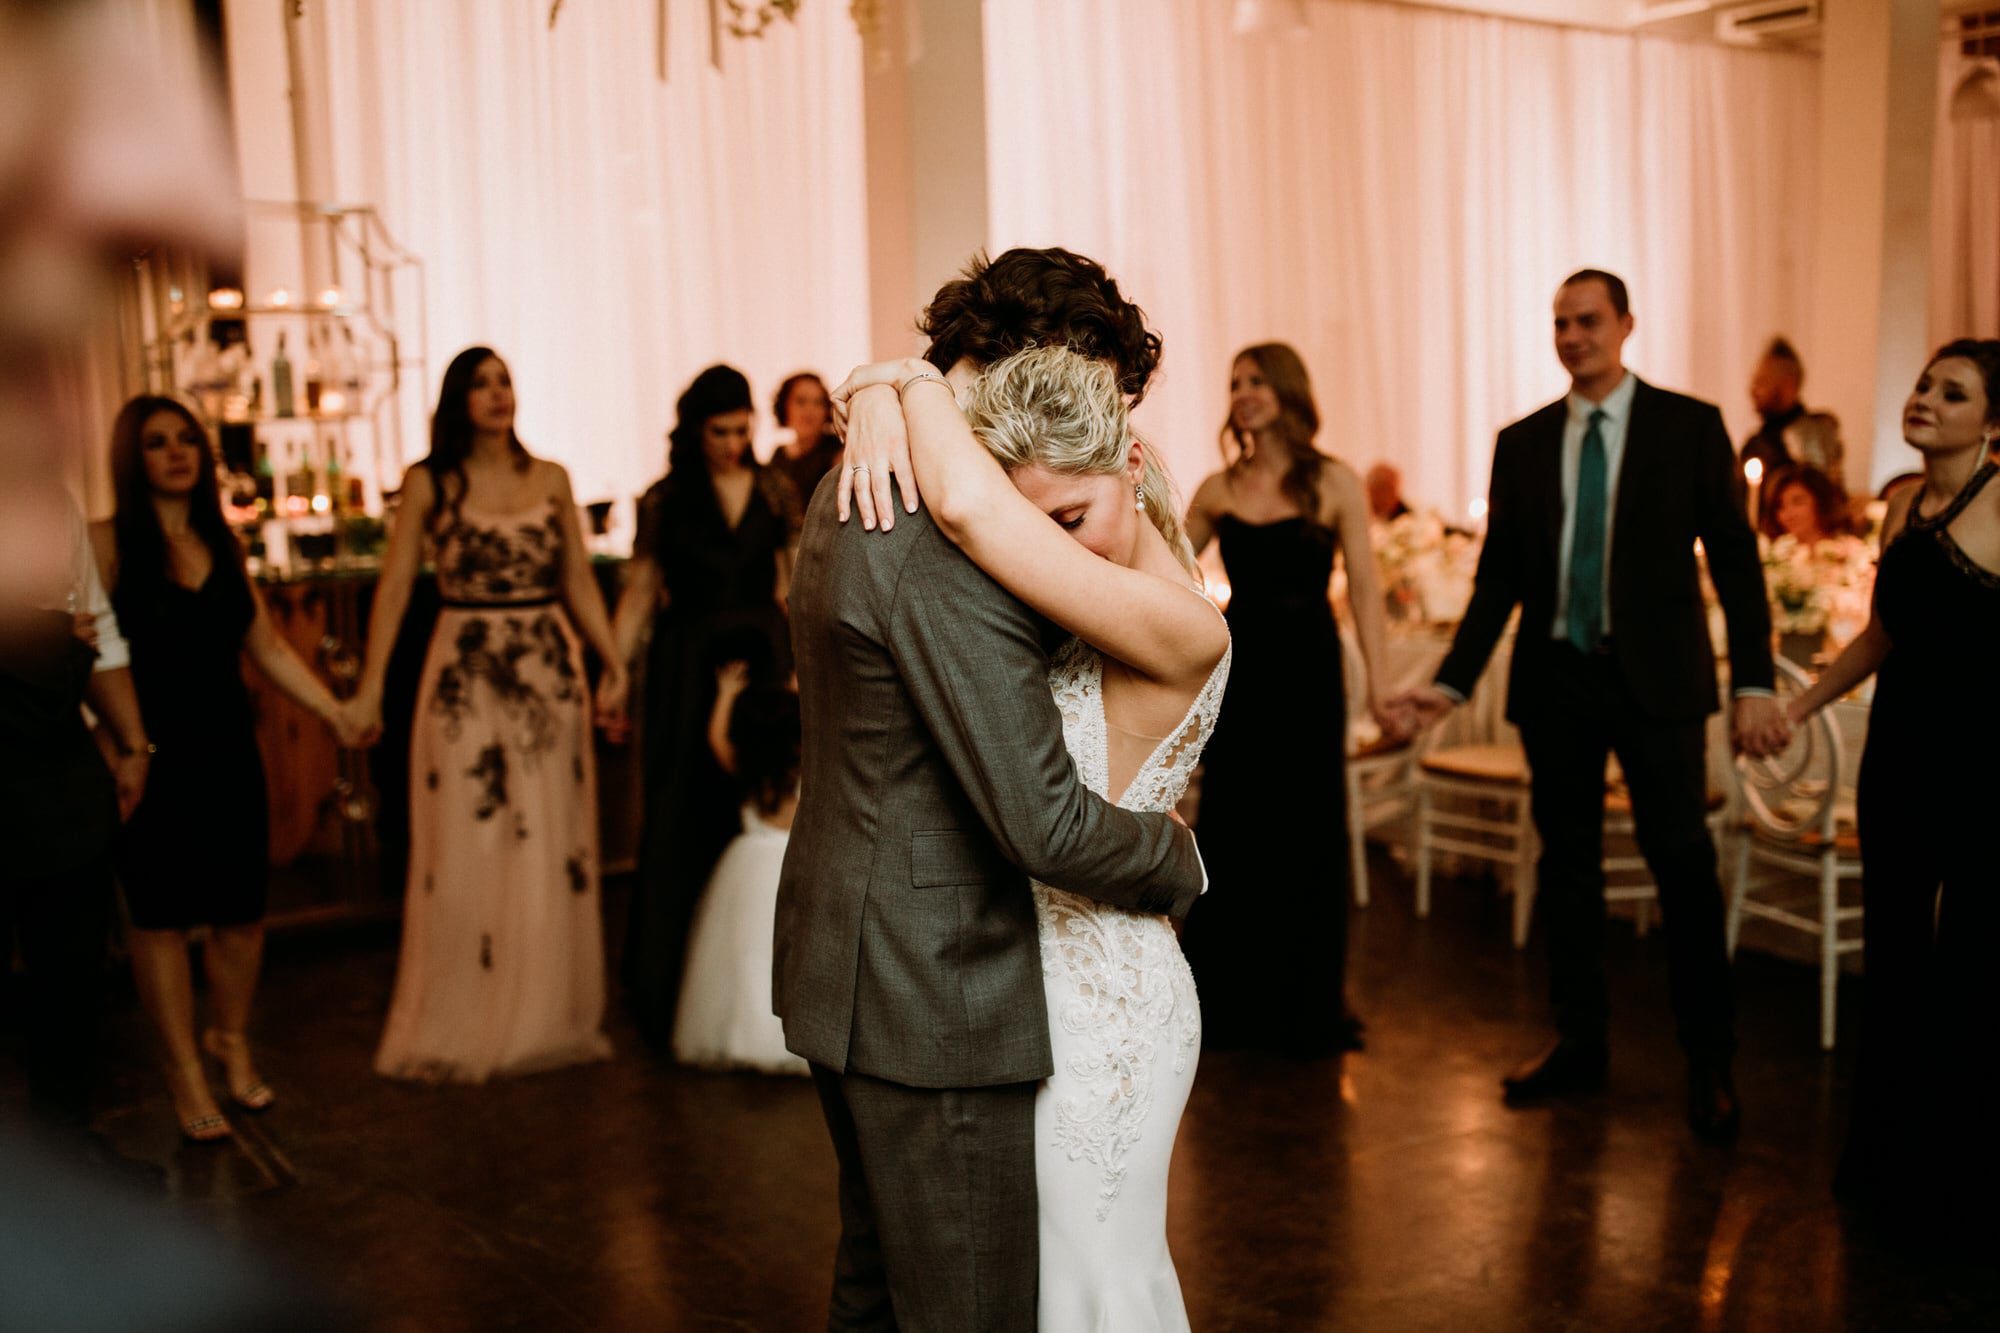 Entrepots Dominion Wedding In Montreal - First Dance Snuggles - Wedding Photographer Brent Calis